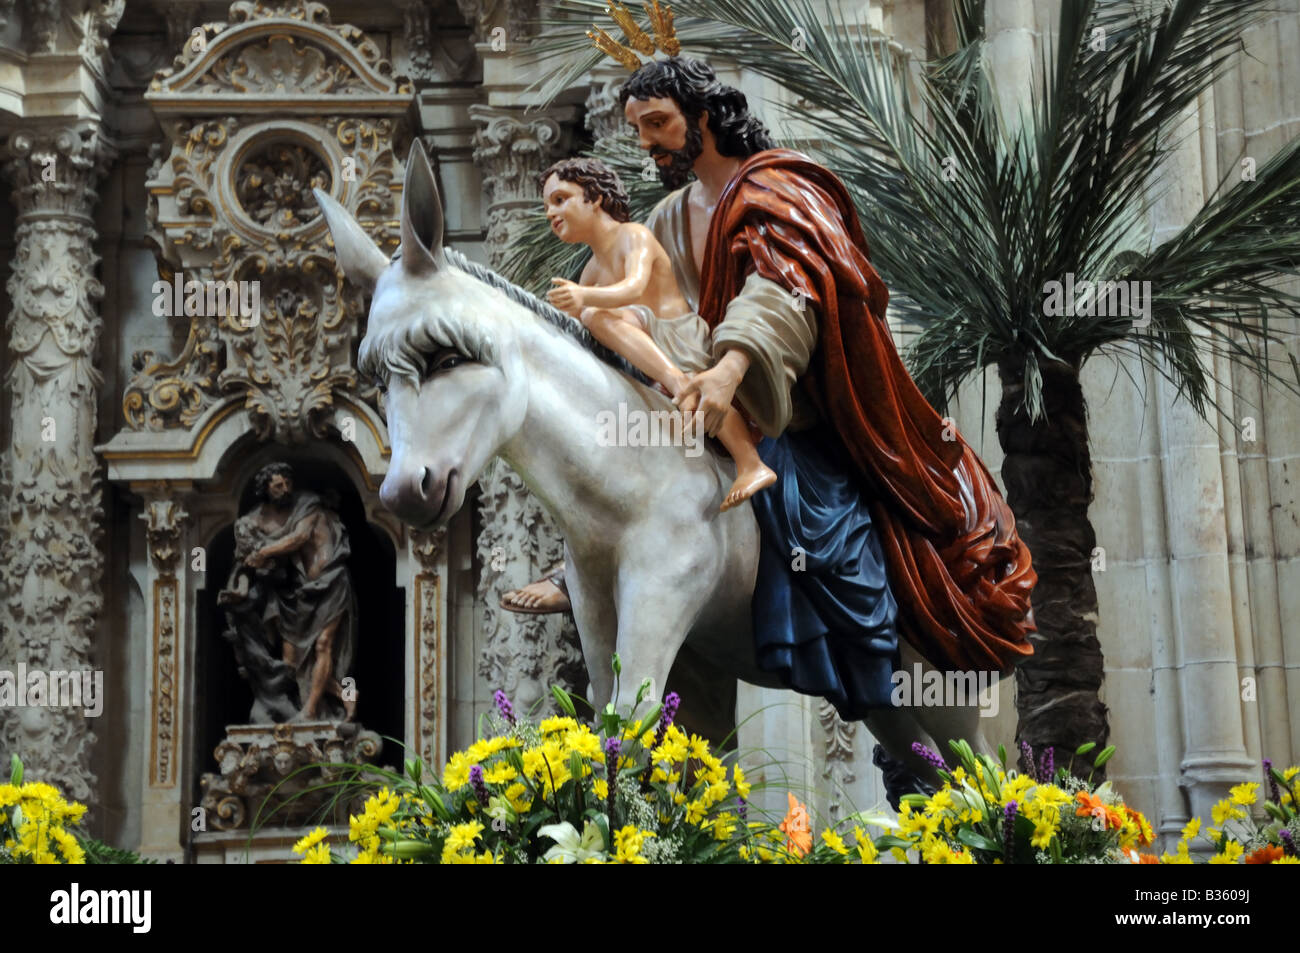 Polichrome wooden carving depicting Jesus Christ with a young boy child on a donkey kept in the New Cathedral Salamanca Spain Stock Photo